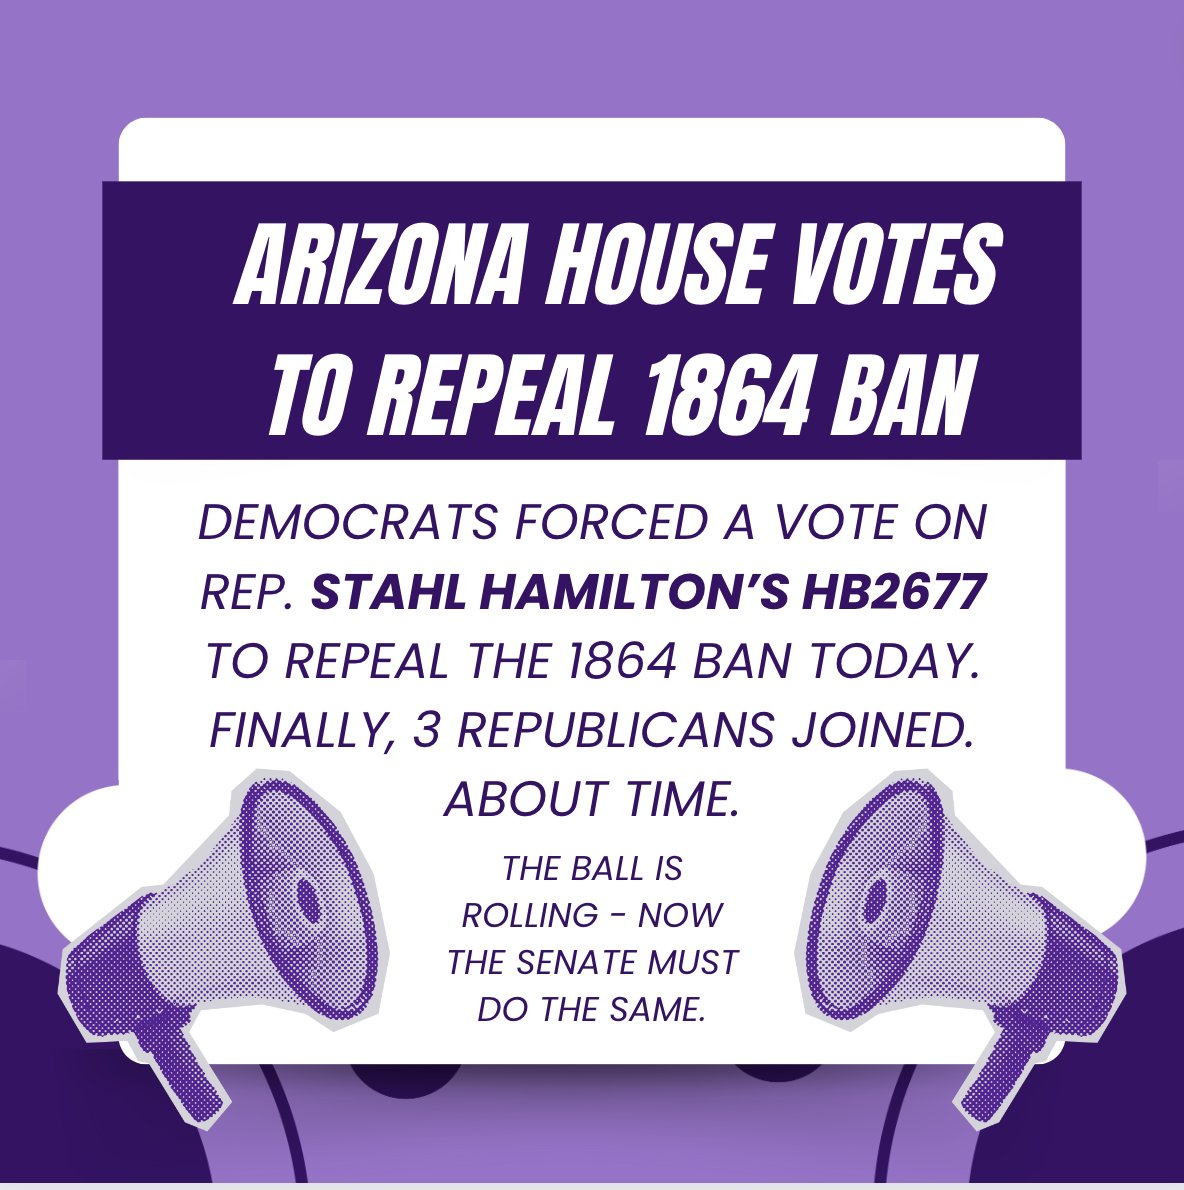 🚨🚨 BREAKING 🚨🚨 After weeks of fighting parliamentary rules and Republican games, Arizona Democrats led a repeal of the draconian 1864 abortion ban and WON. Arizonans, we hear you. Good to know we are out of the 19th century. #azleg #AbortionIsHealthcare #abortionrights